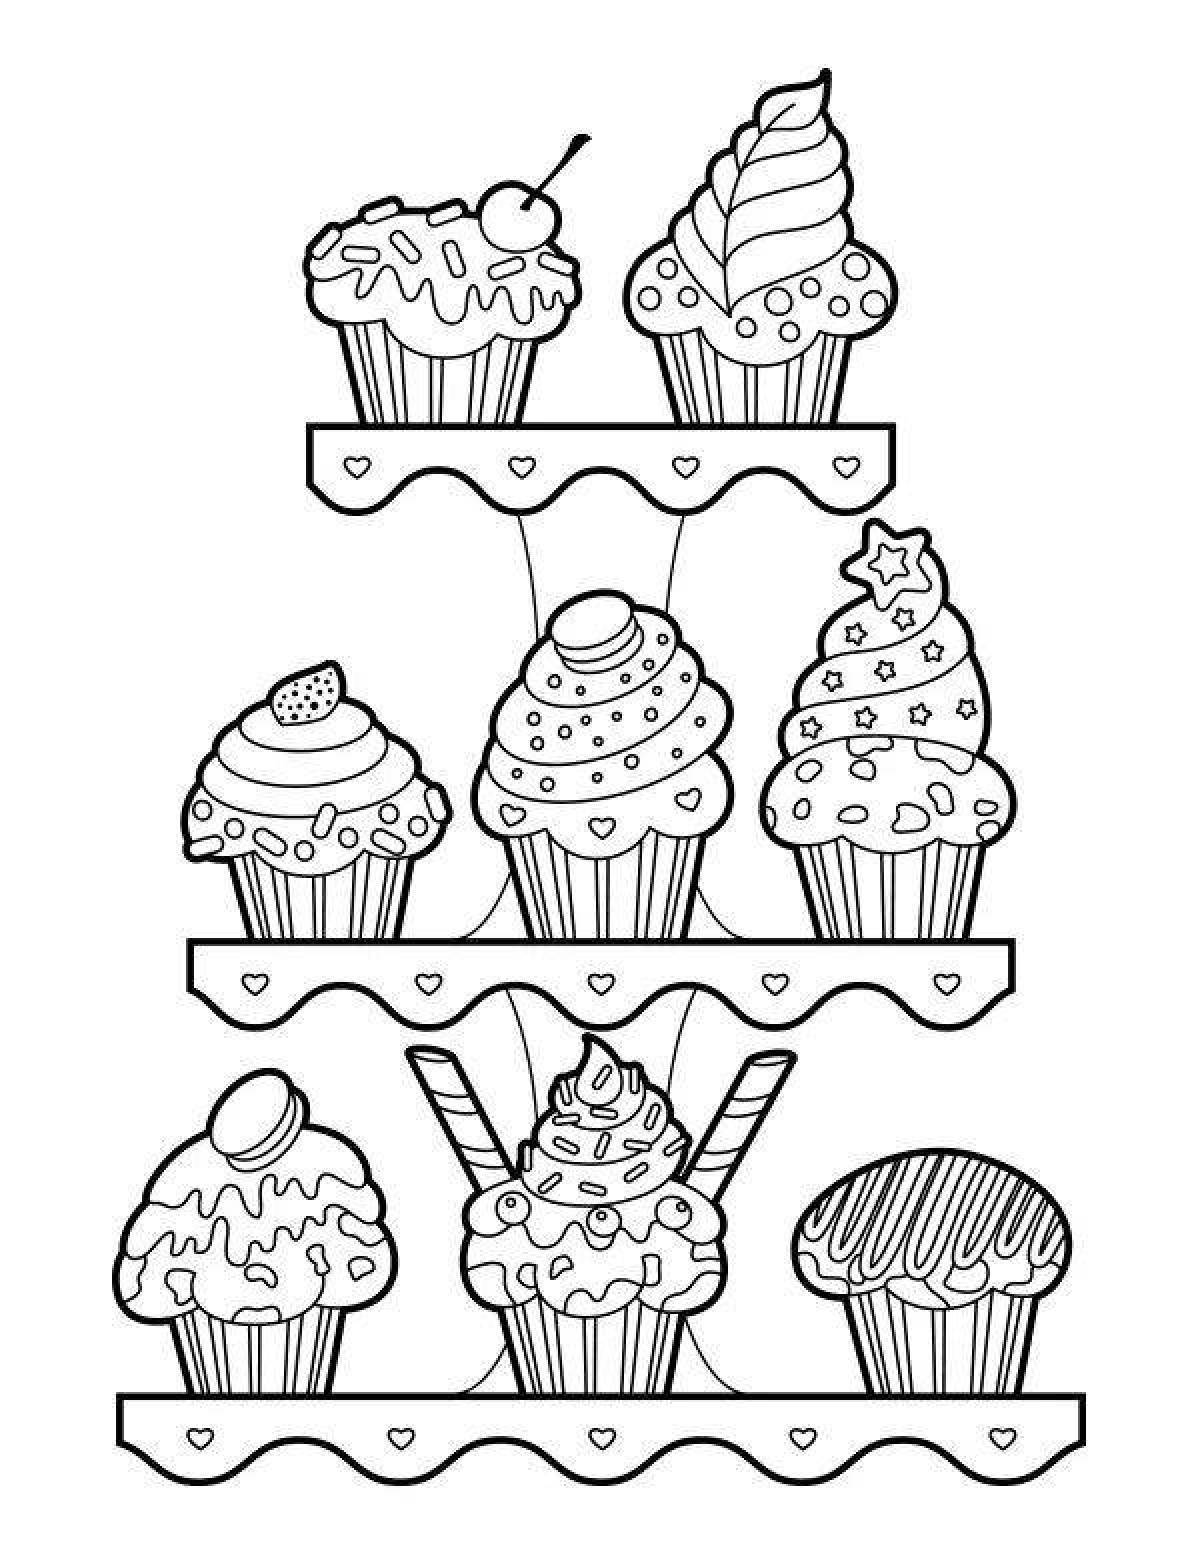 Amazing coloring book cupcakes for kids